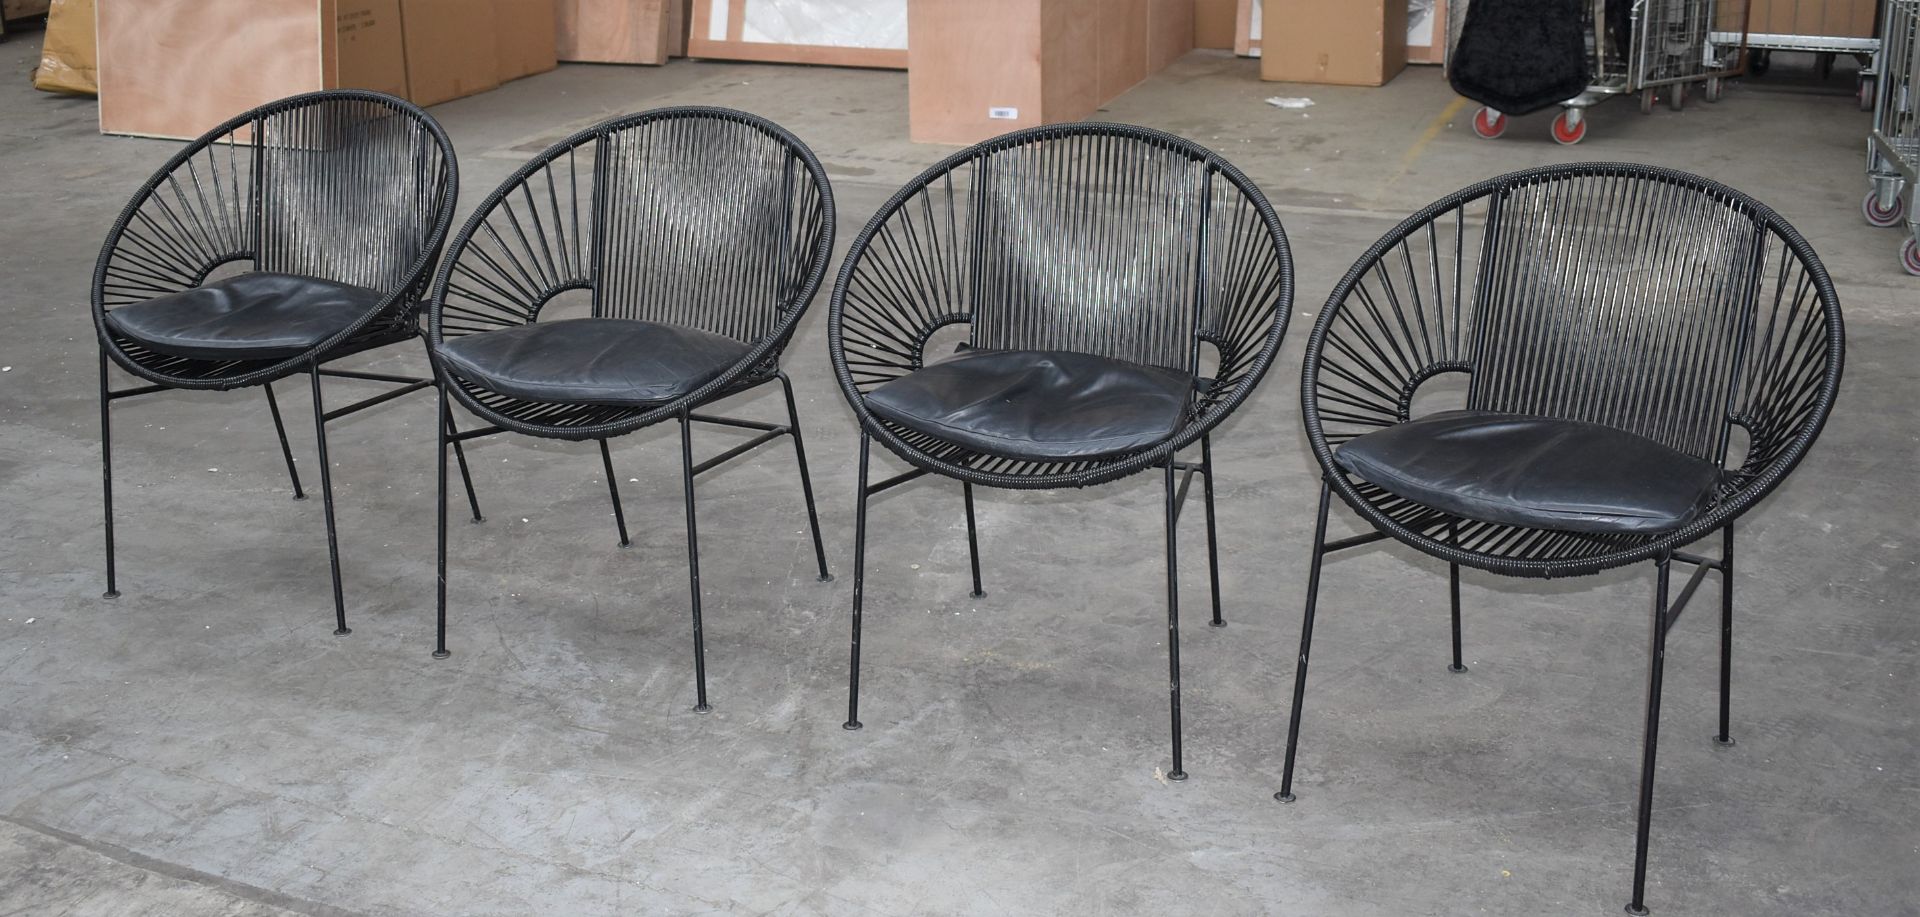 4 x Innit Designer Chairs - Acapulco Style Chairs in Black Suitable For Indoor or Outdoor Use -